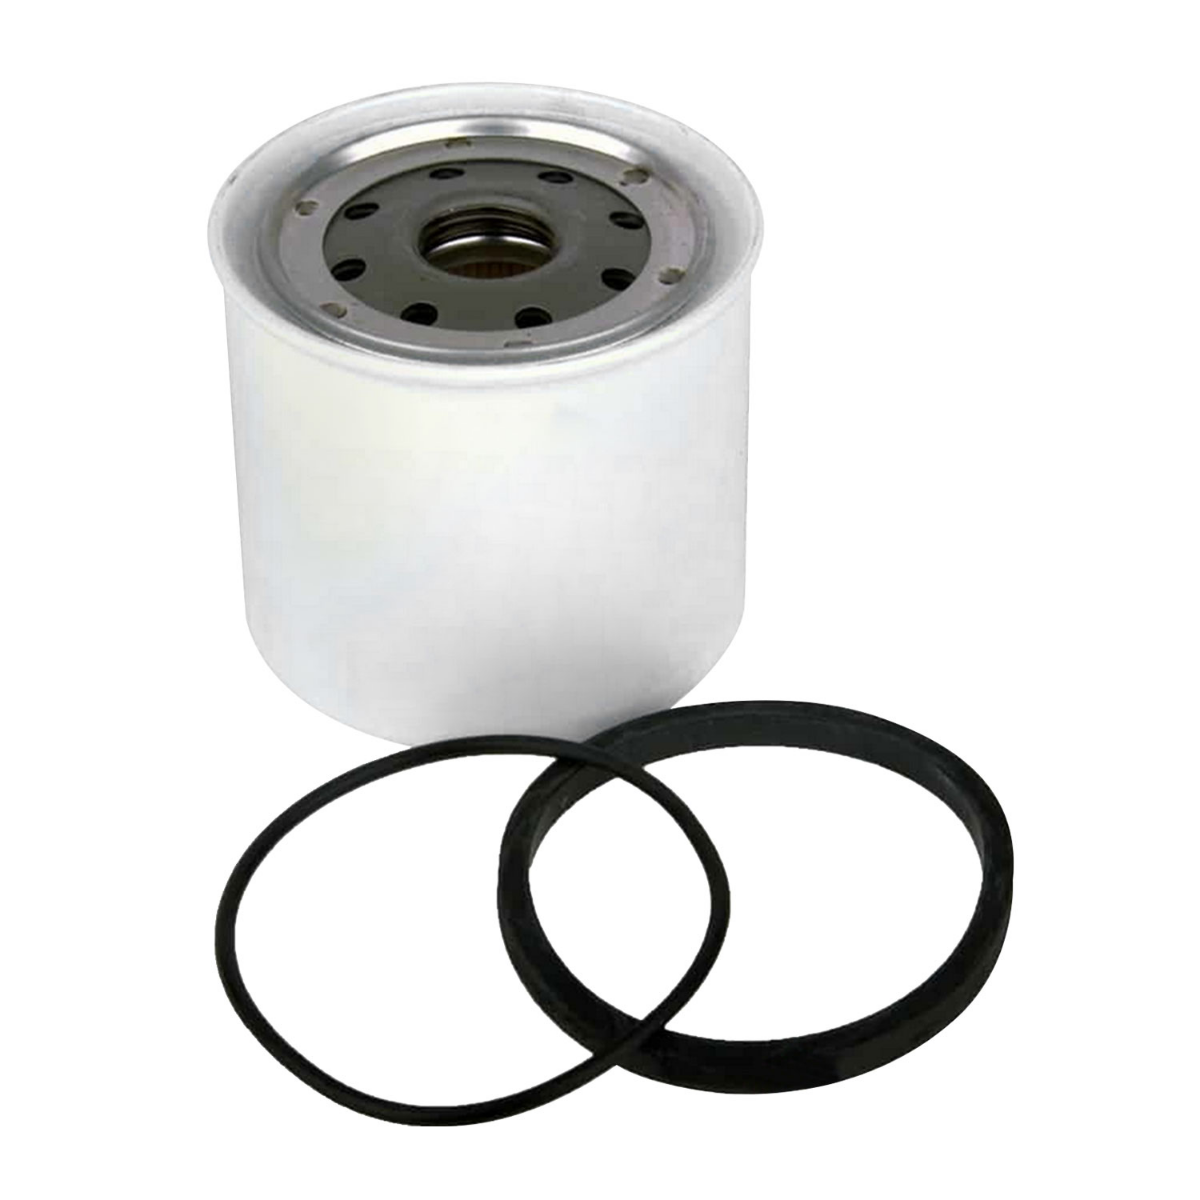 Ingersoll-Rand Fuel Water Seperator Filter Replaces Ingersoll-Rand 54525530 